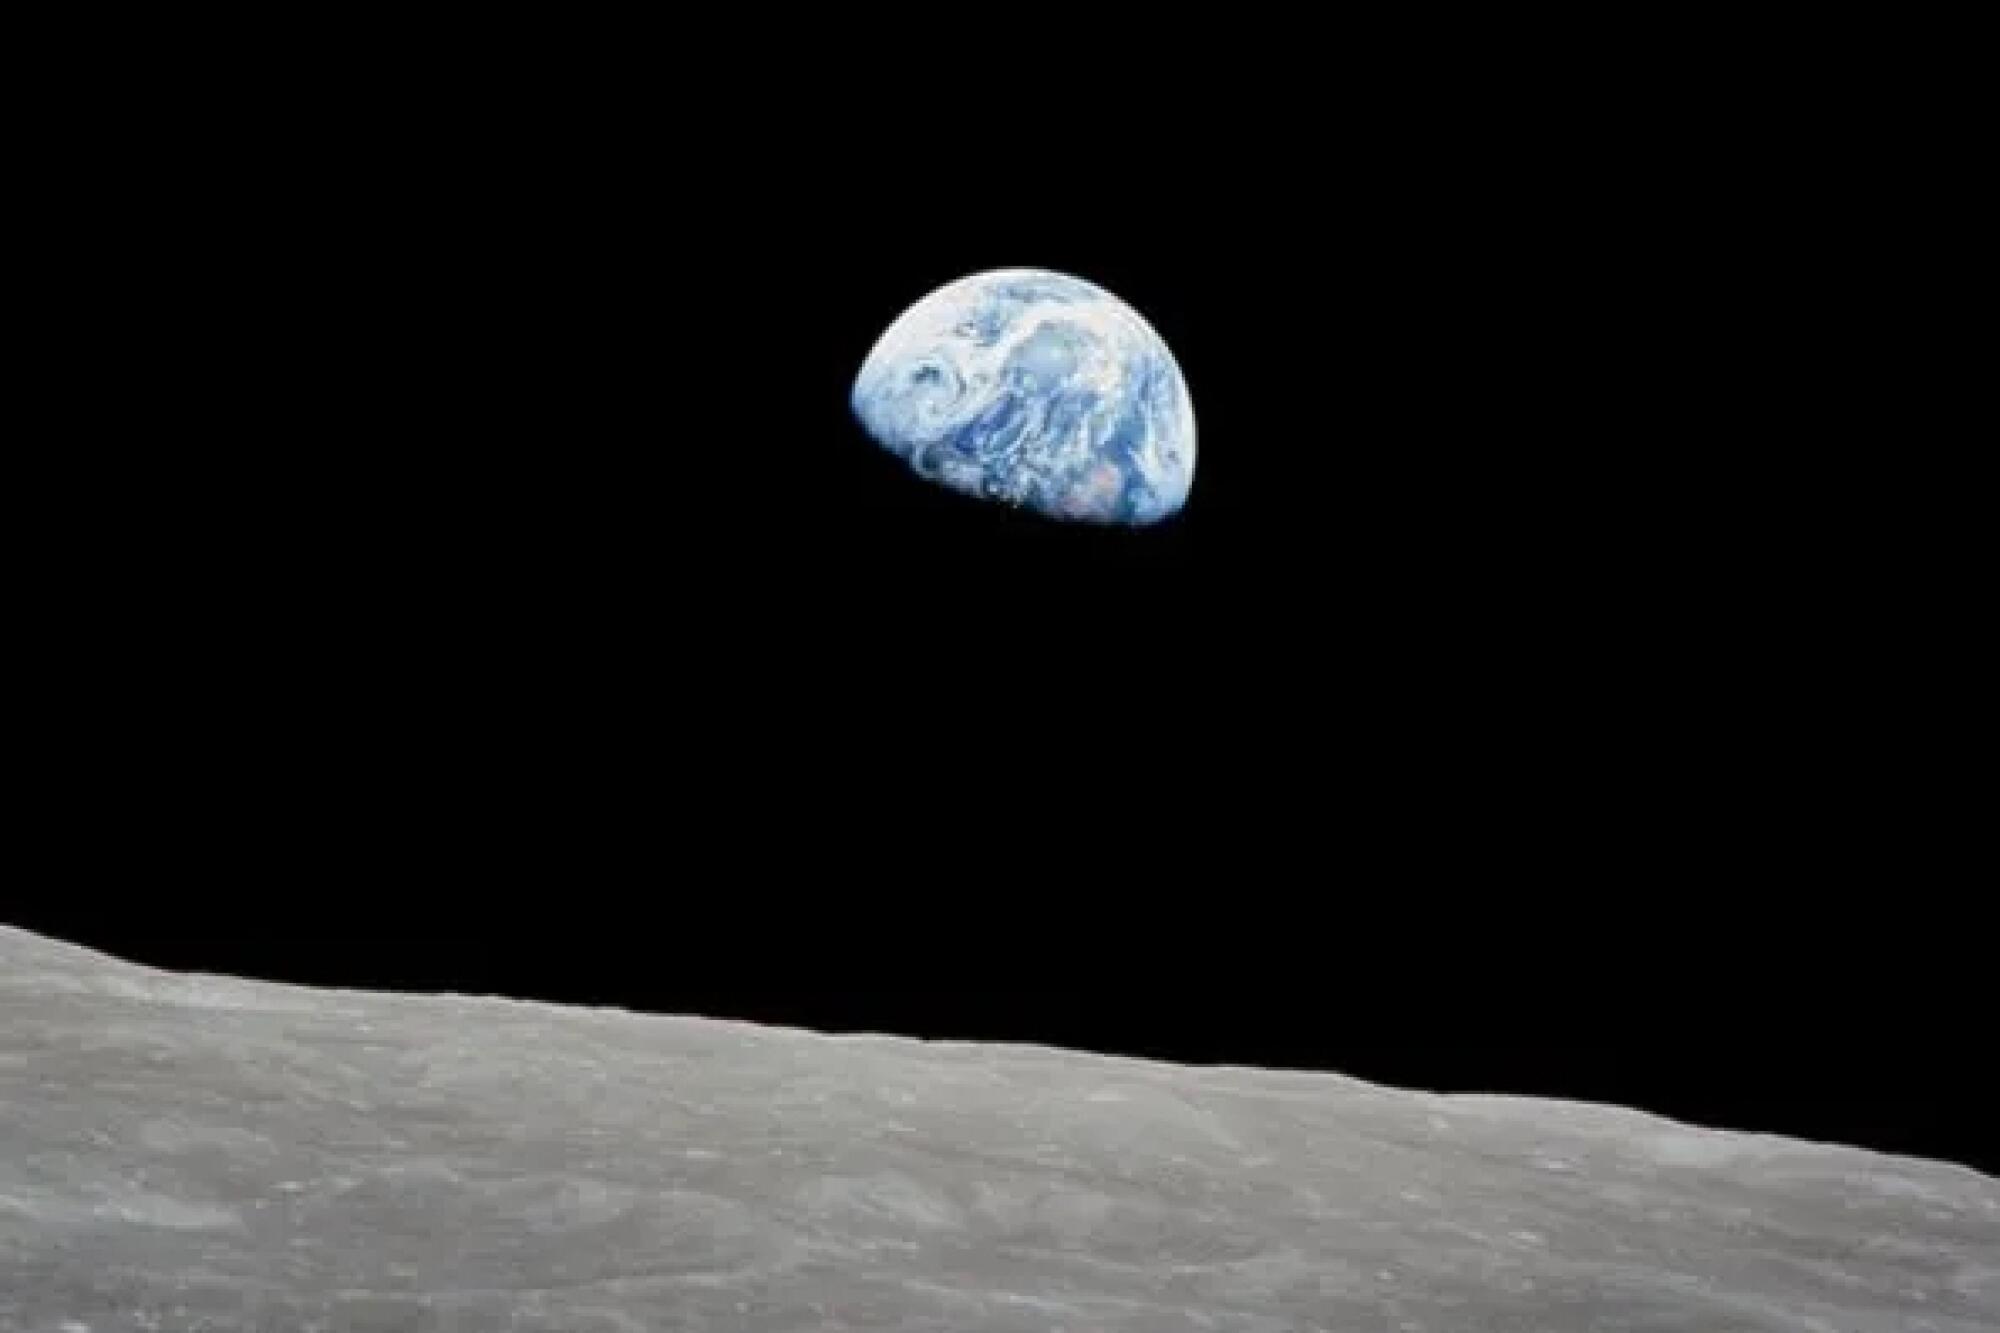 Earth rises above the surface of the moon.